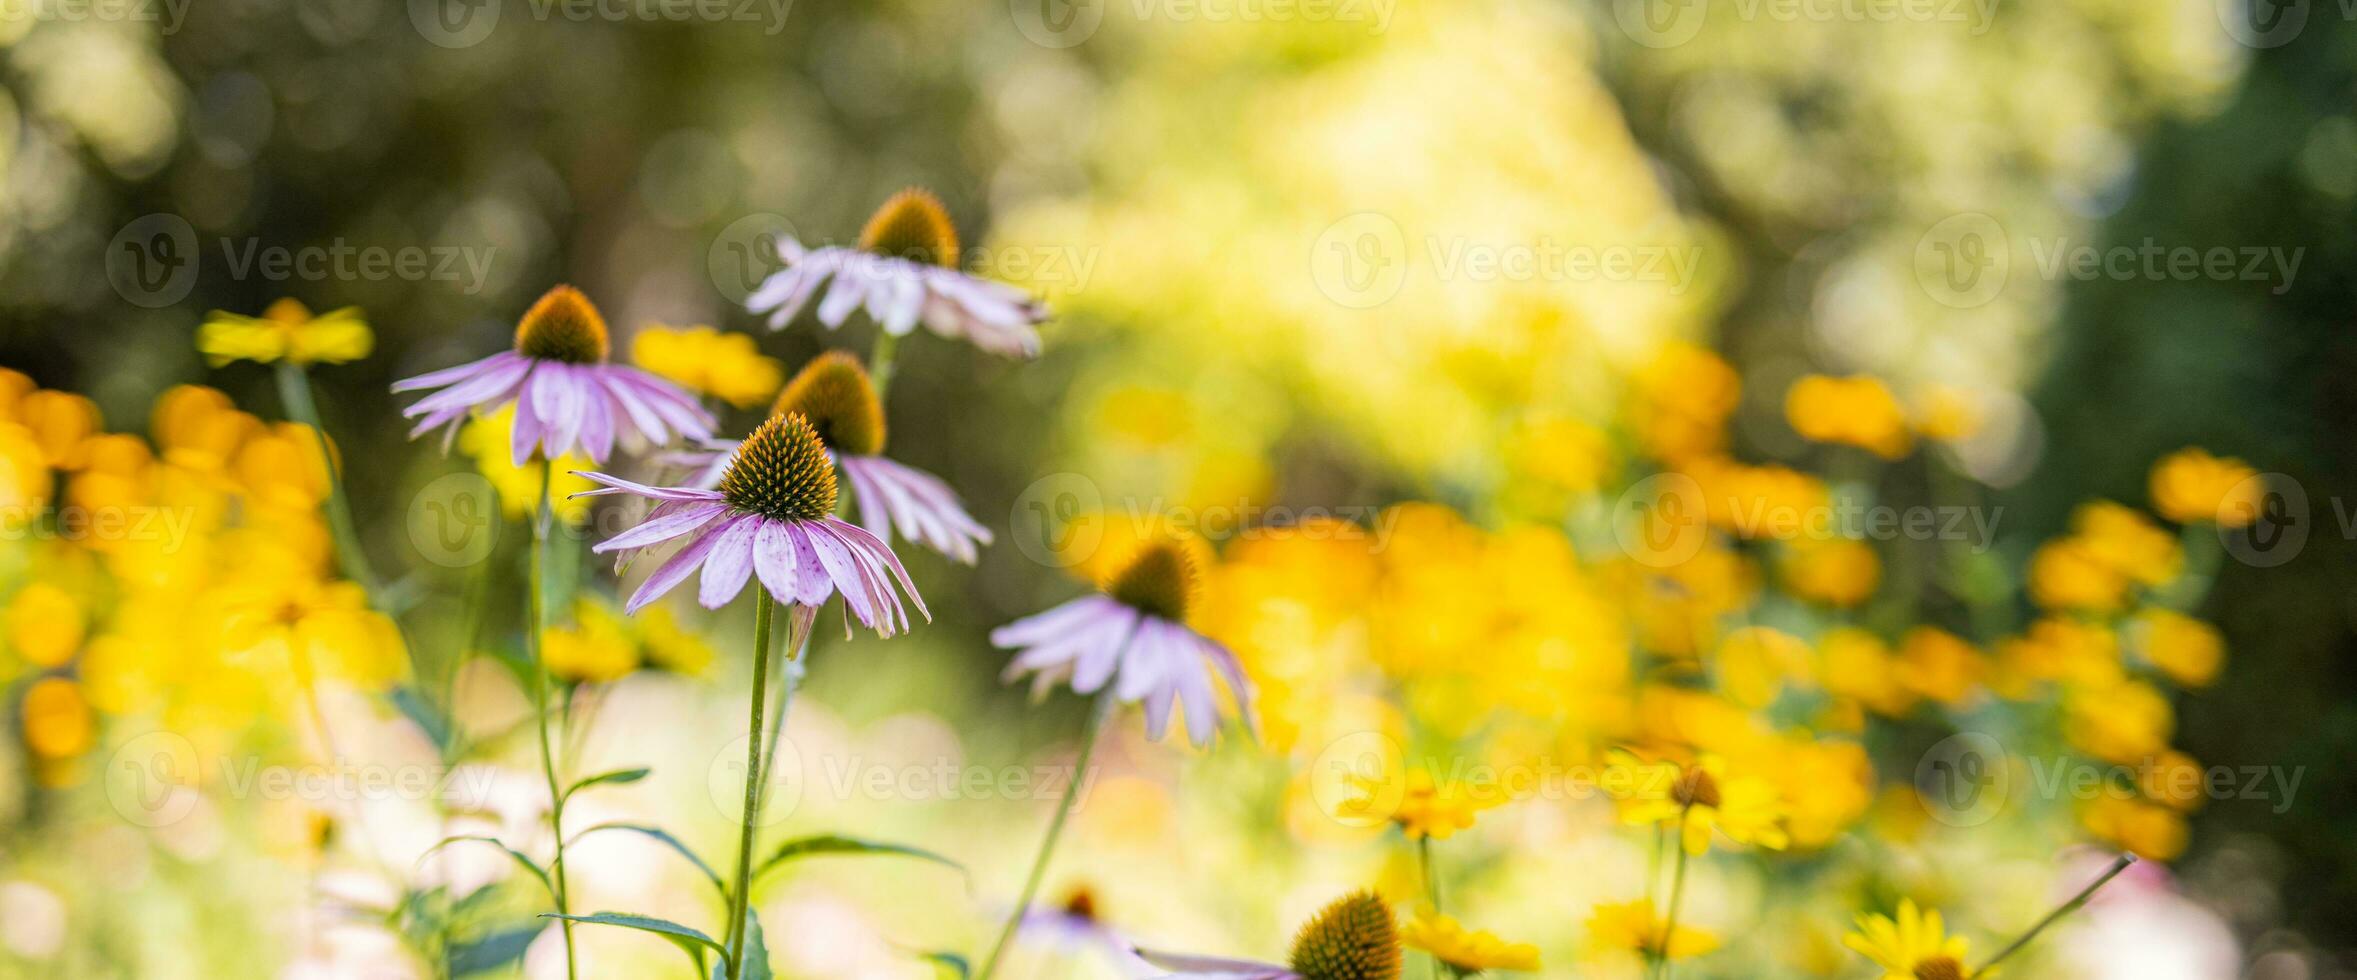 Wild purple cosmos flowers in meadow in rays of sunlight on blurred nature landscape park background with copy space, soft focus, beautiful bokeh. Autumn flowers bright foliage backdrop photo